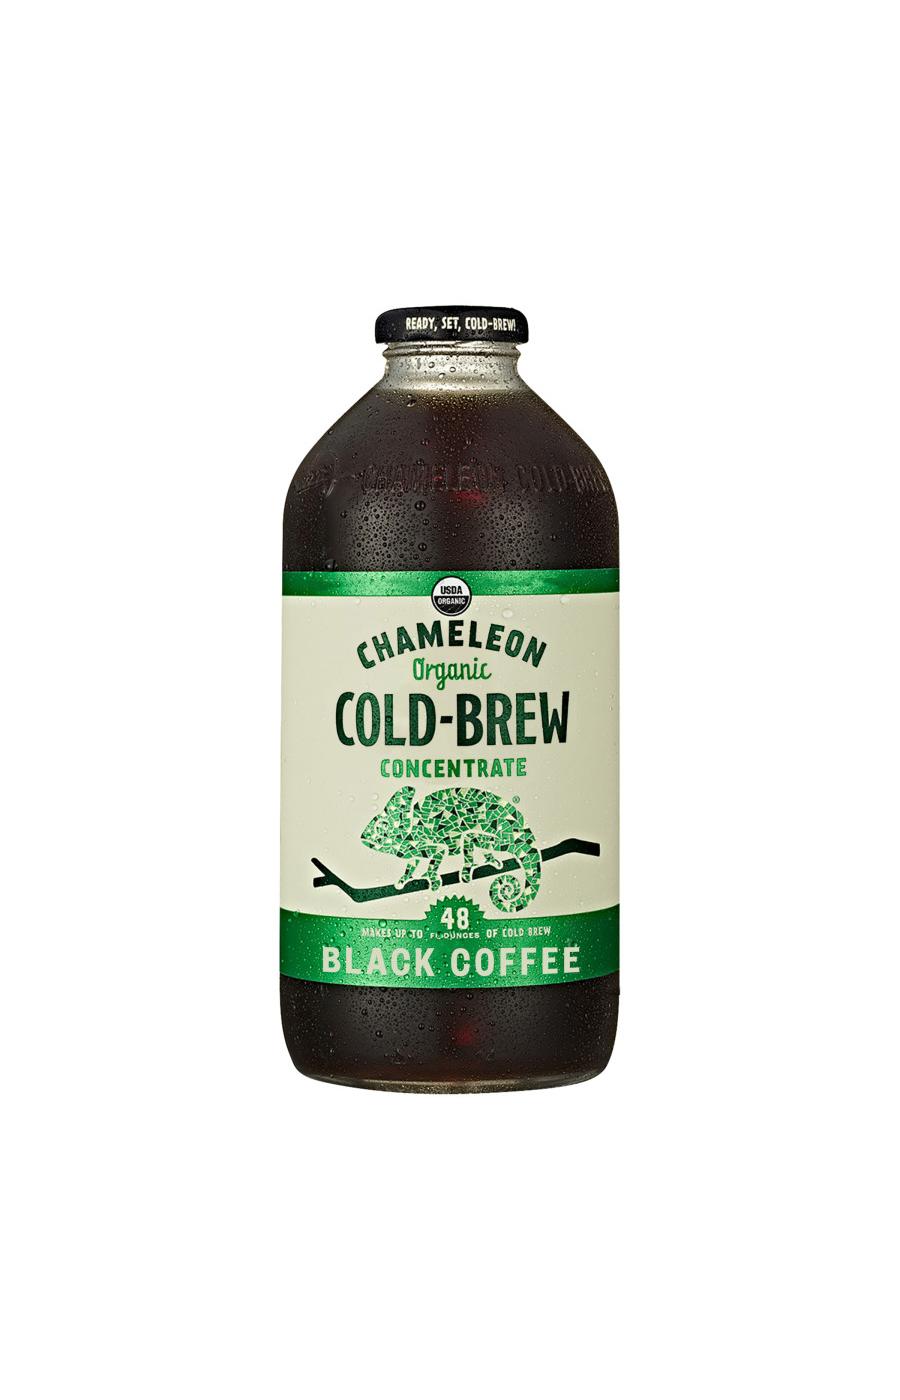 Chameleon Organic Cold Brew Concentrate Black Coffee; image 5 of 8